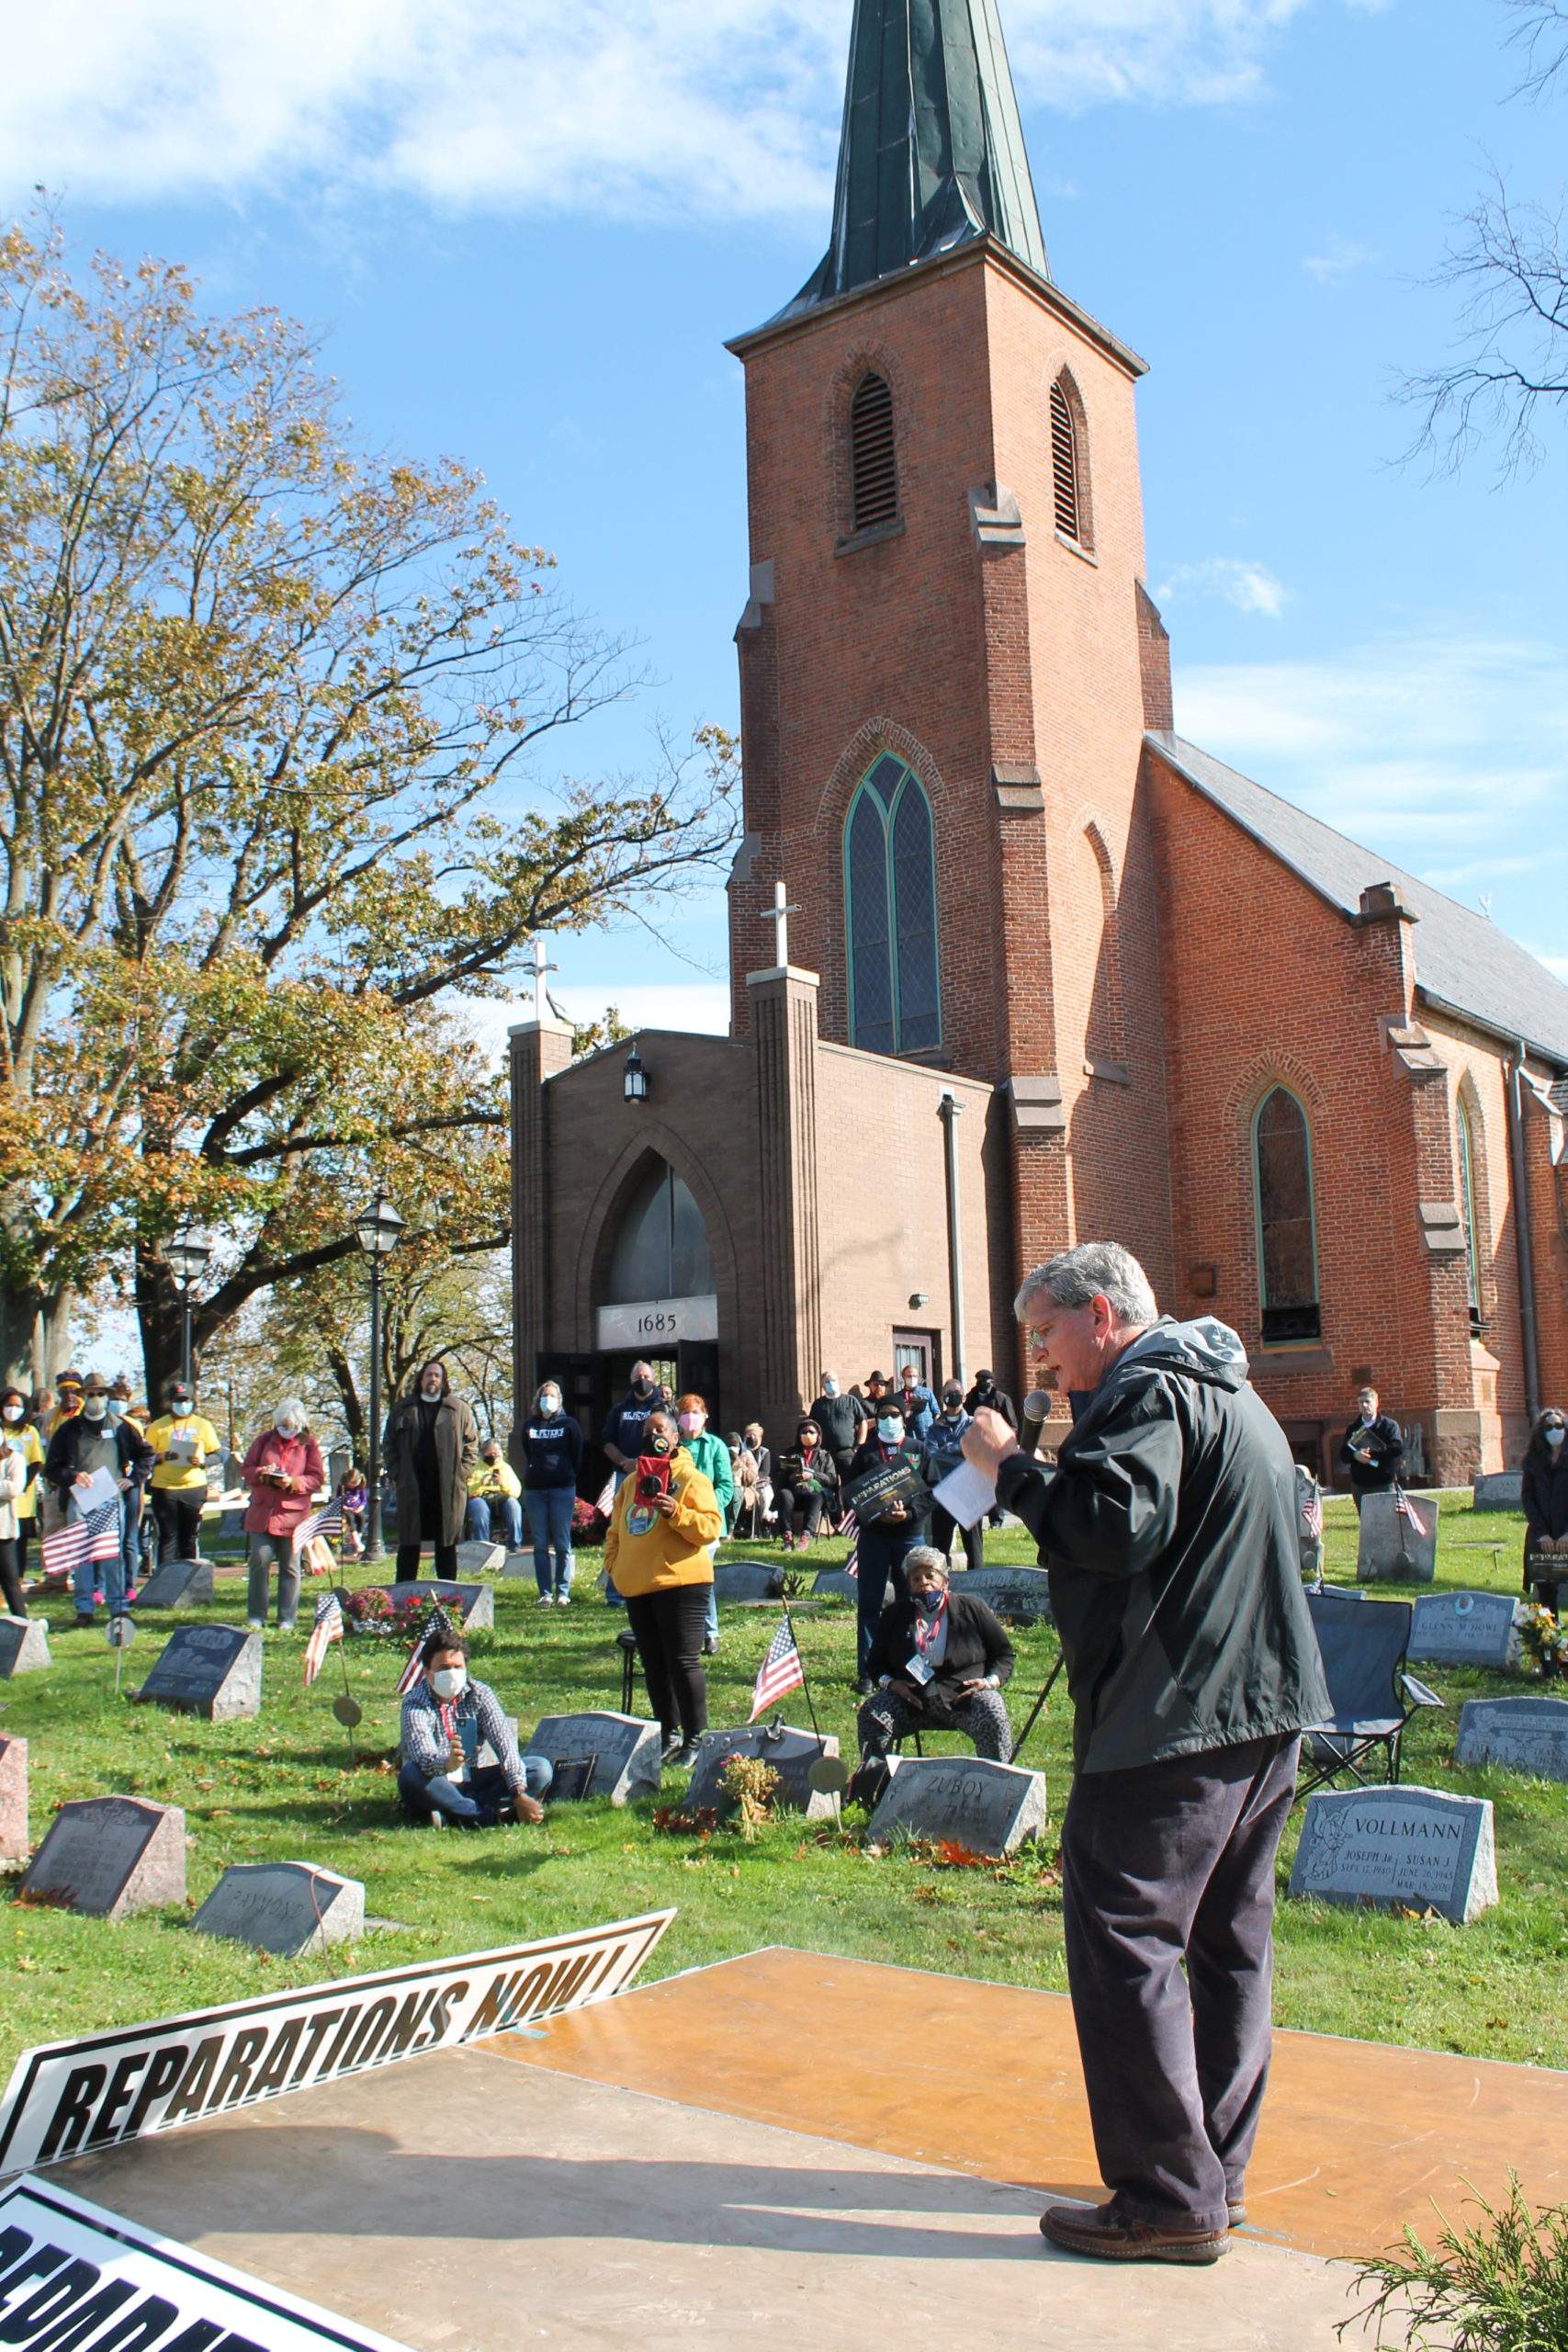 The Right Rev. William H. Stokes, Bishop of the Episcopal Diocese of New Jersey, addresses a crowd of 200 at the "Say the Word: Reparations" rally on Oct. 30, 2021 at St. Peter's Episcopal Church in Perth Amboy, NJ